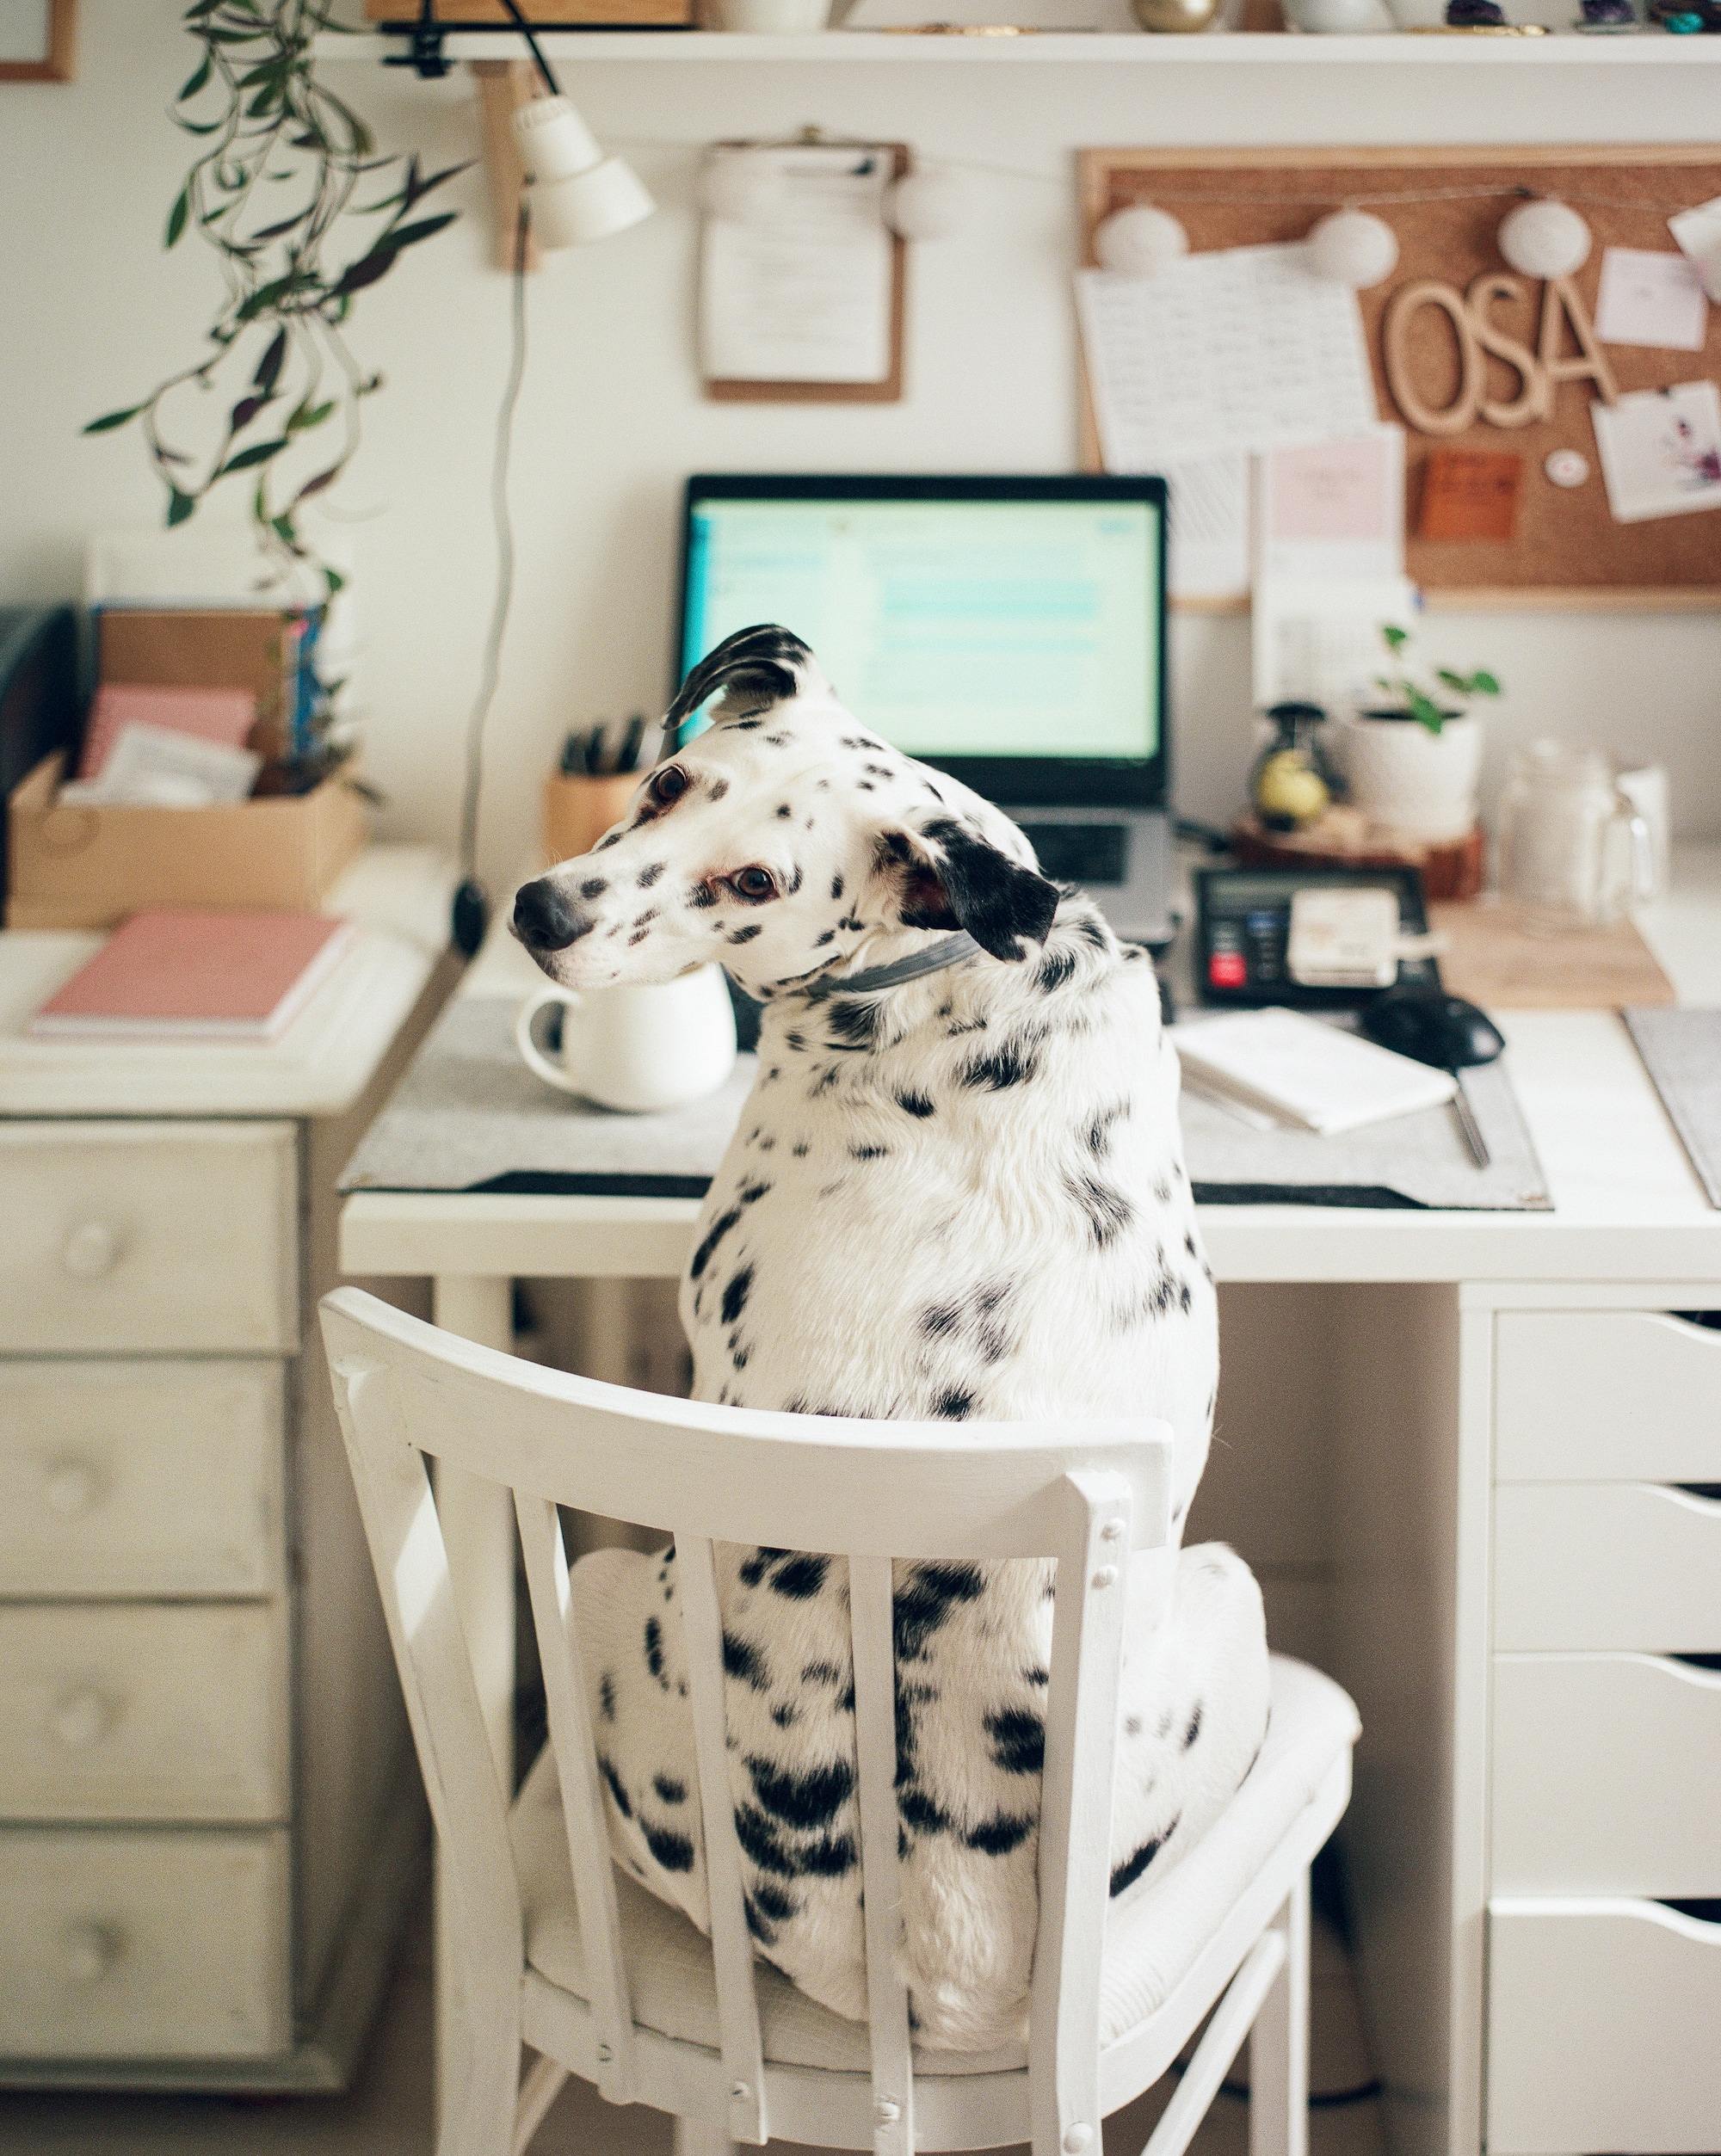 Dalmatian Posing For a Photo Sitting in a Desk Chair in Our Somerville Boston Apartments